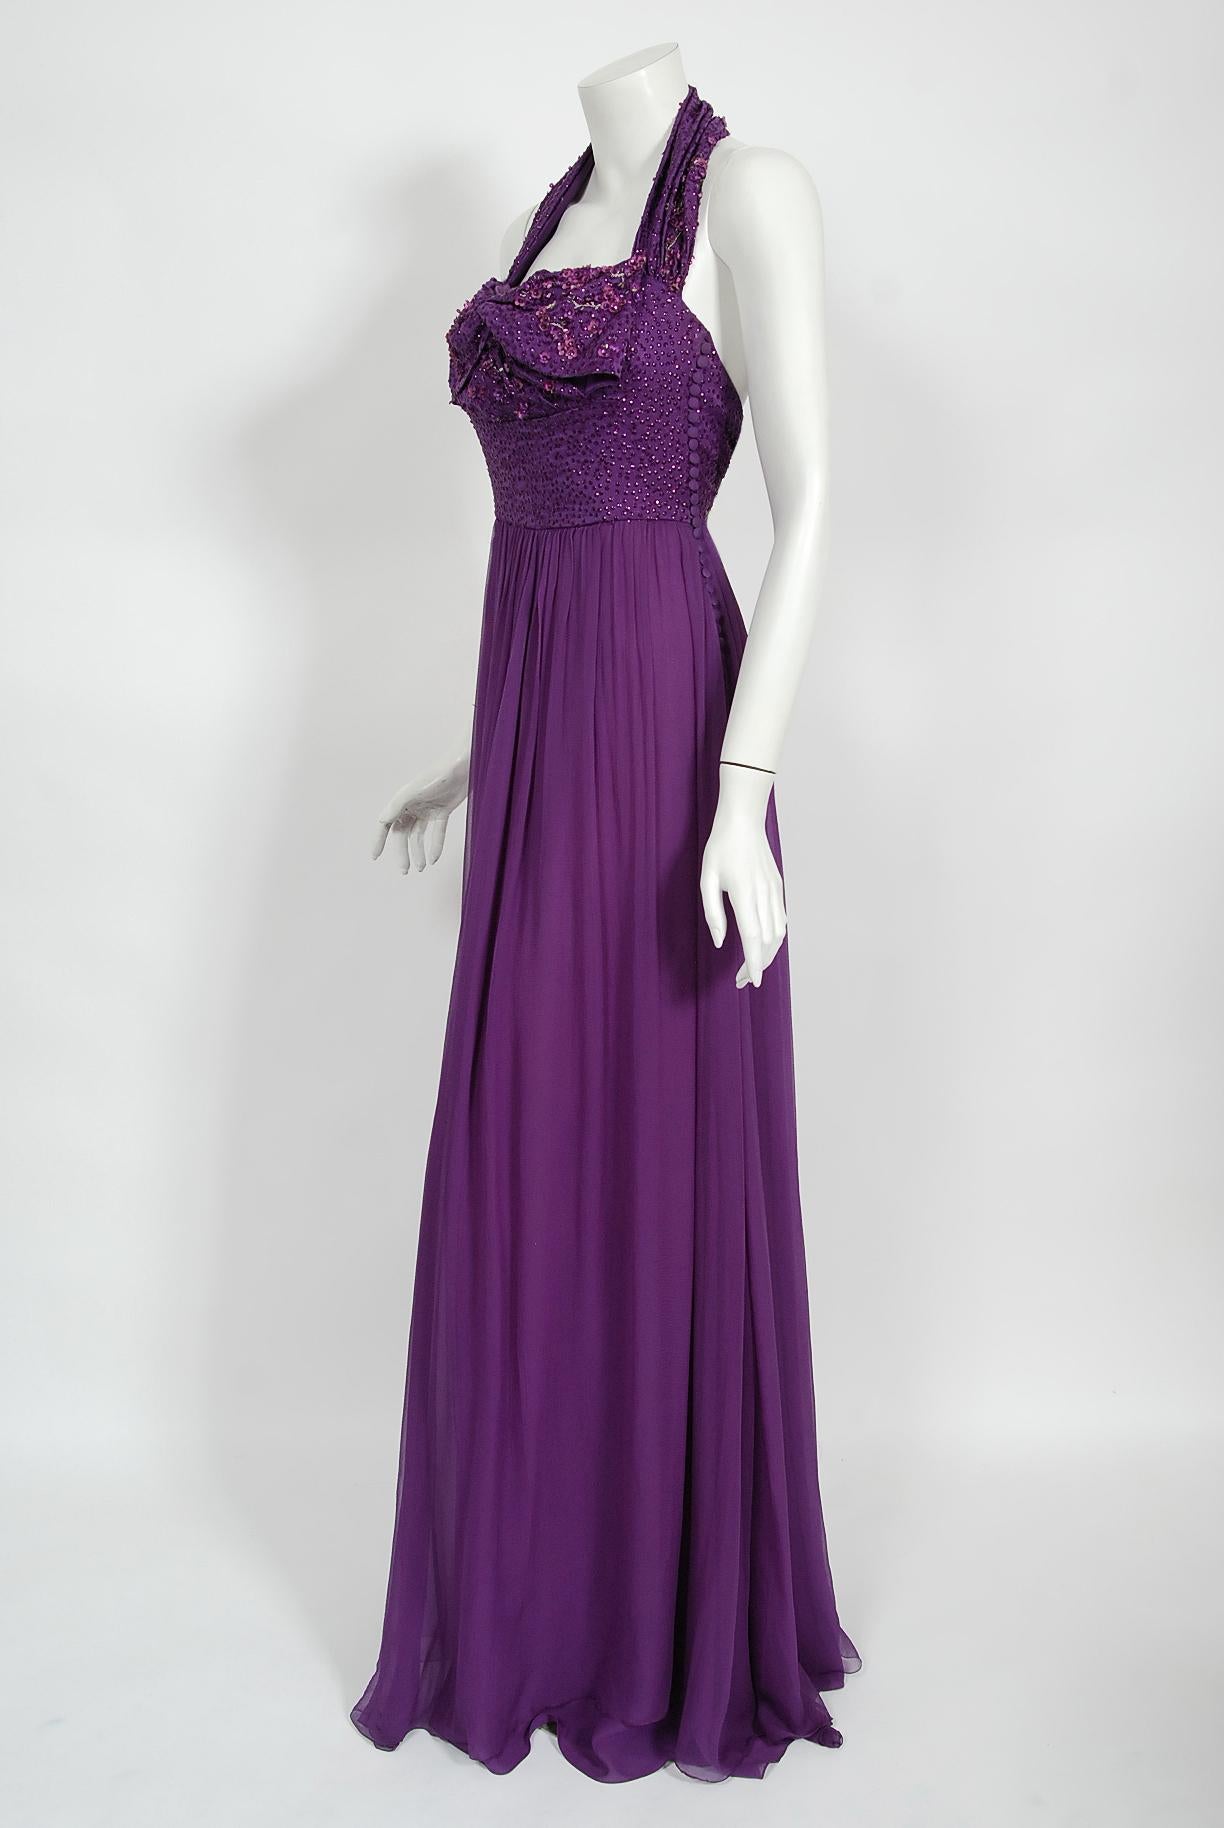 Vintage 2009 Christian Dior by Galliano Beaded Purple Silk Halter Backless Gown 1